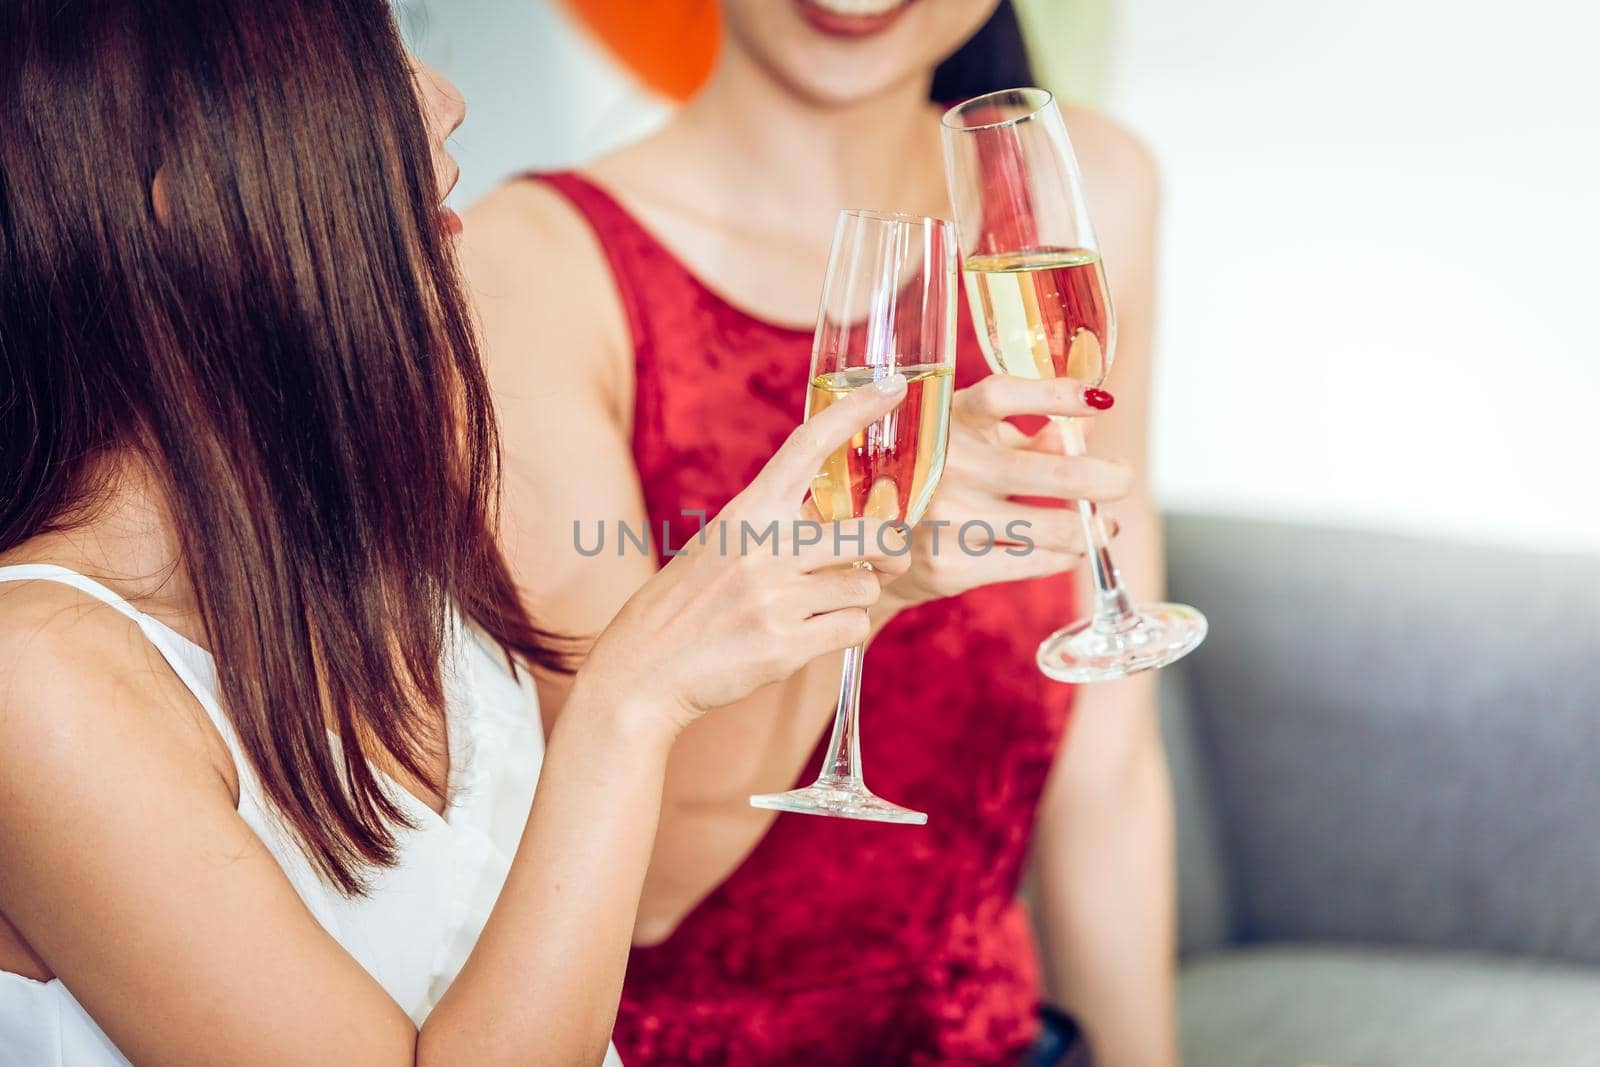 Women happy drinking white wine or champagne talking with friend enjoy together in party.